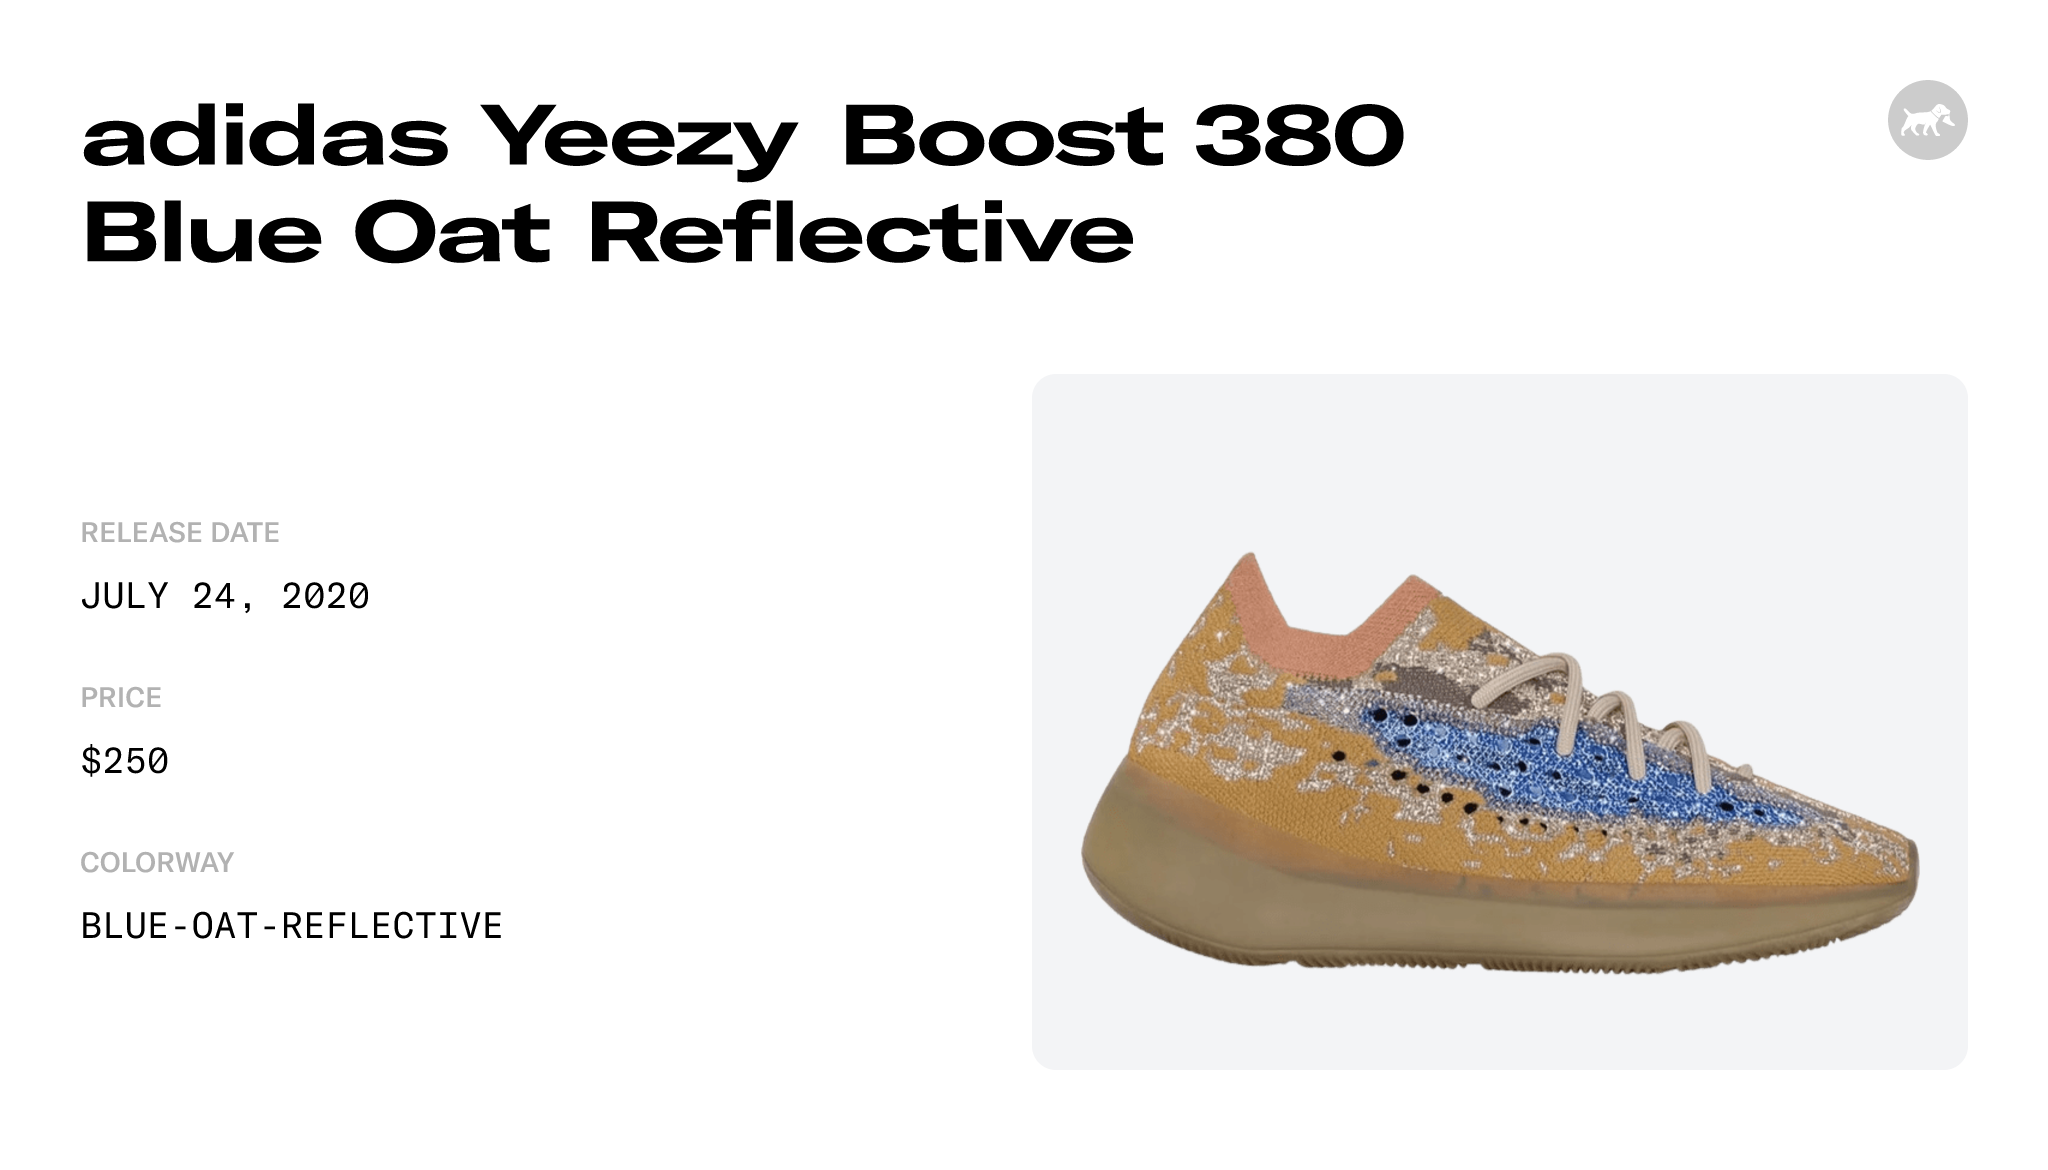 adidas Yeezy Boost 380 Blue Oat Reflective - FX9847 Raffles and Release Date